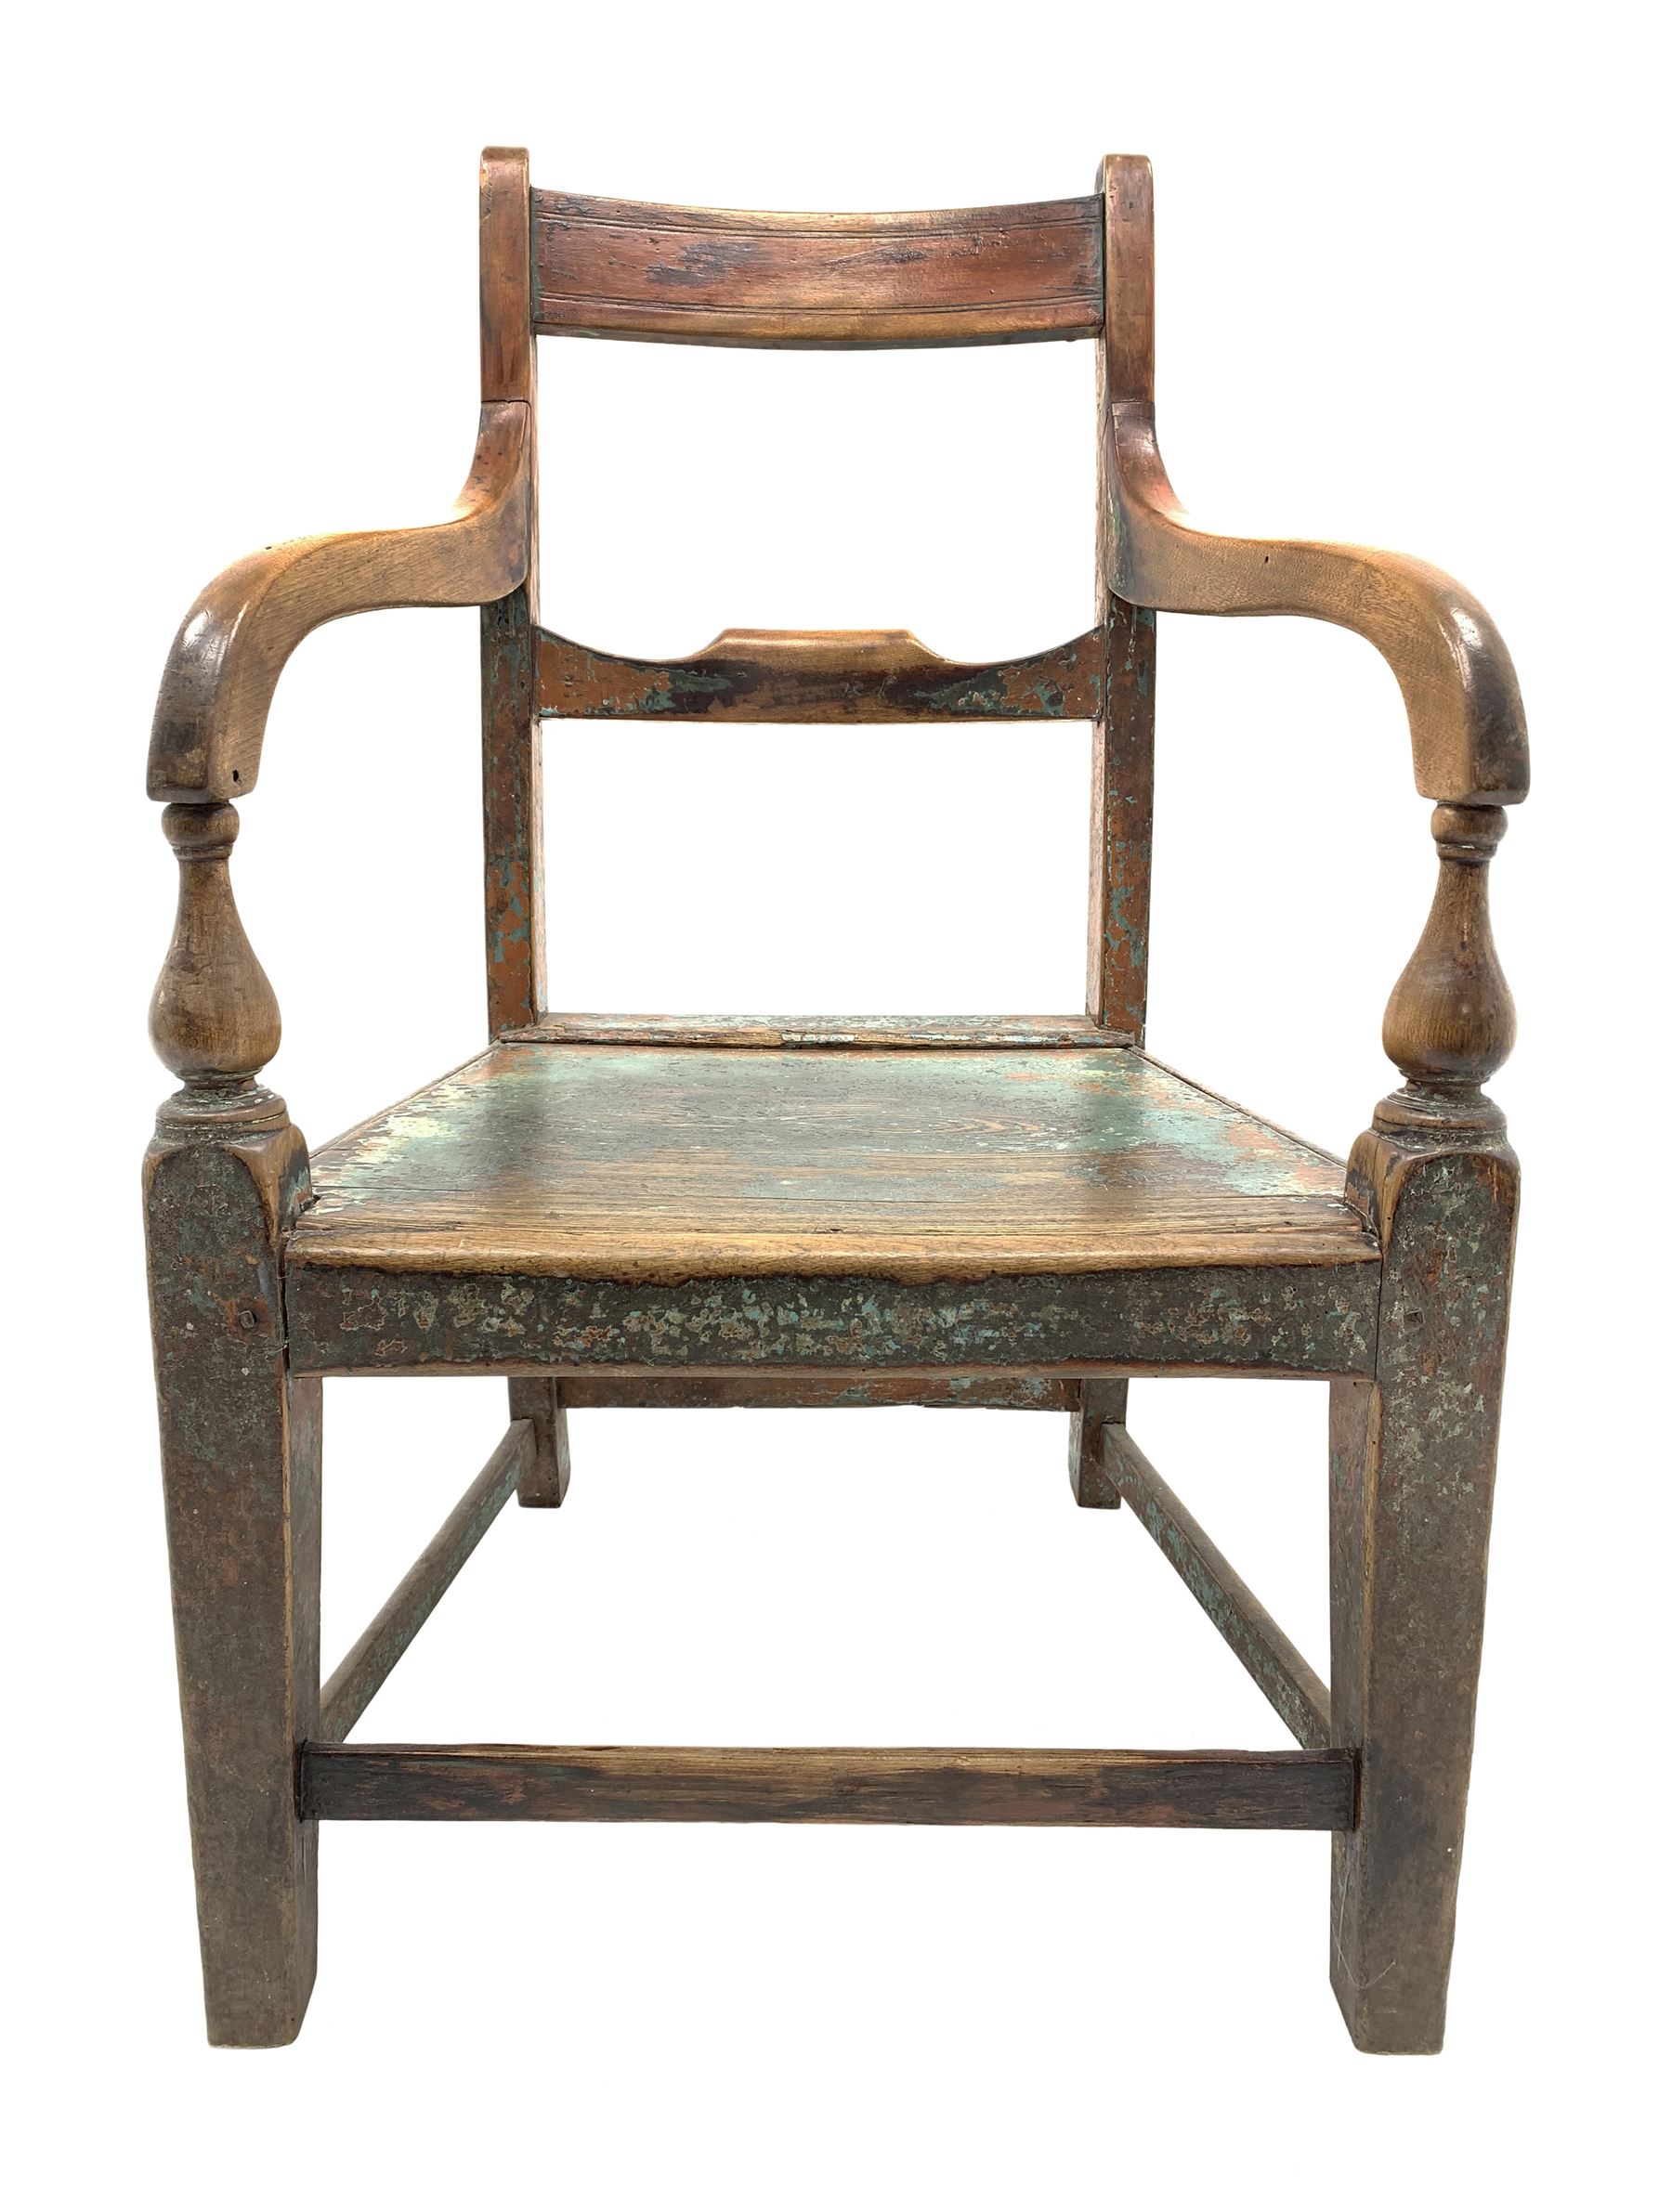 Late 18th century country elm armchair